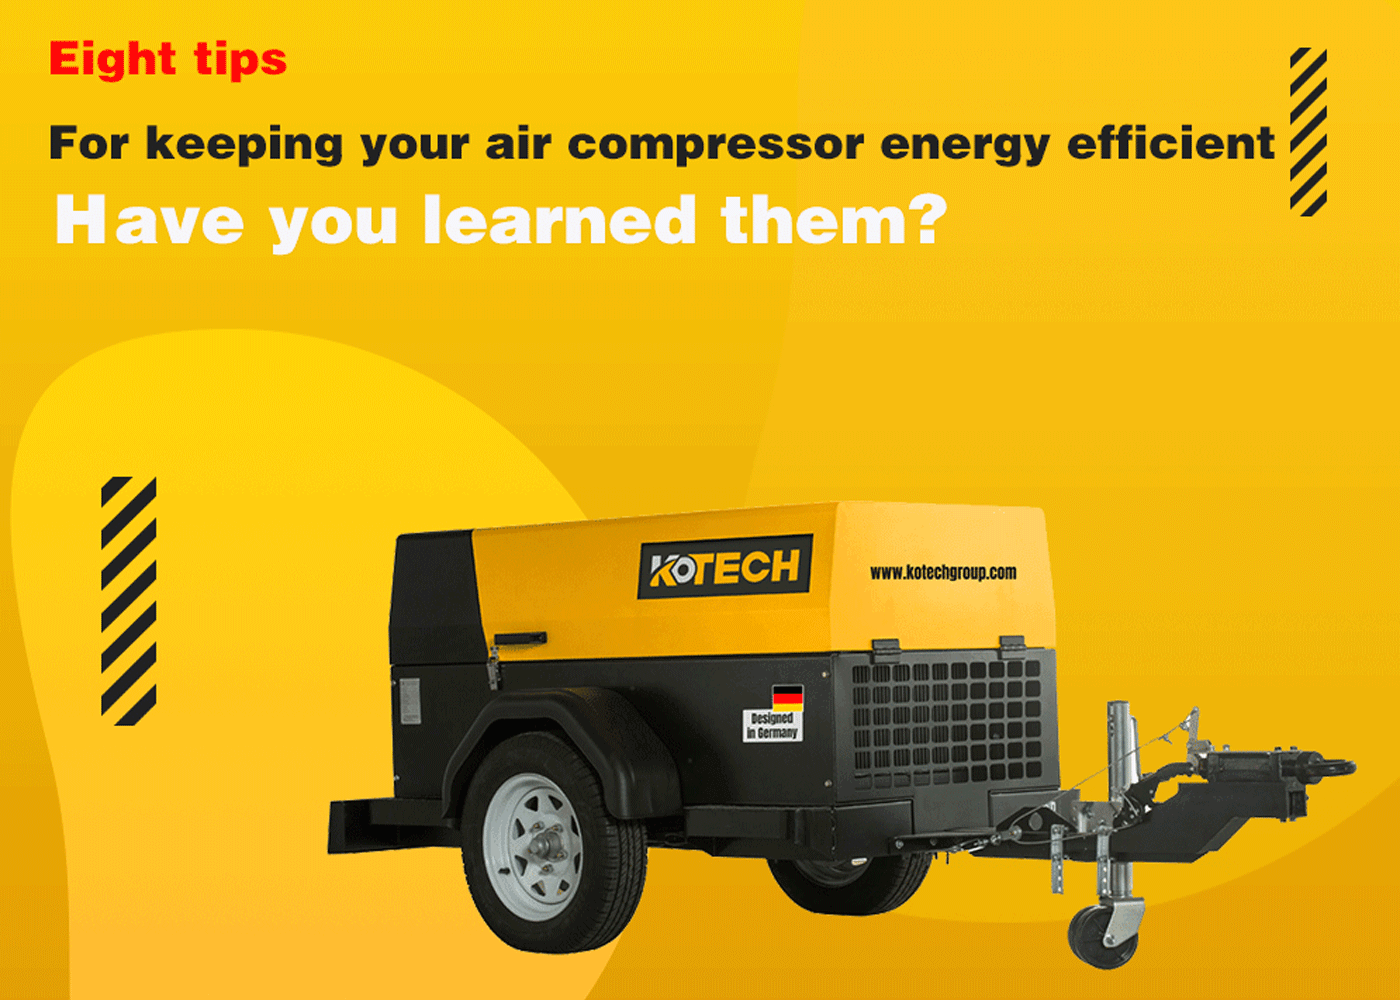 8 Tips for Air Compressor Energy Efficiency